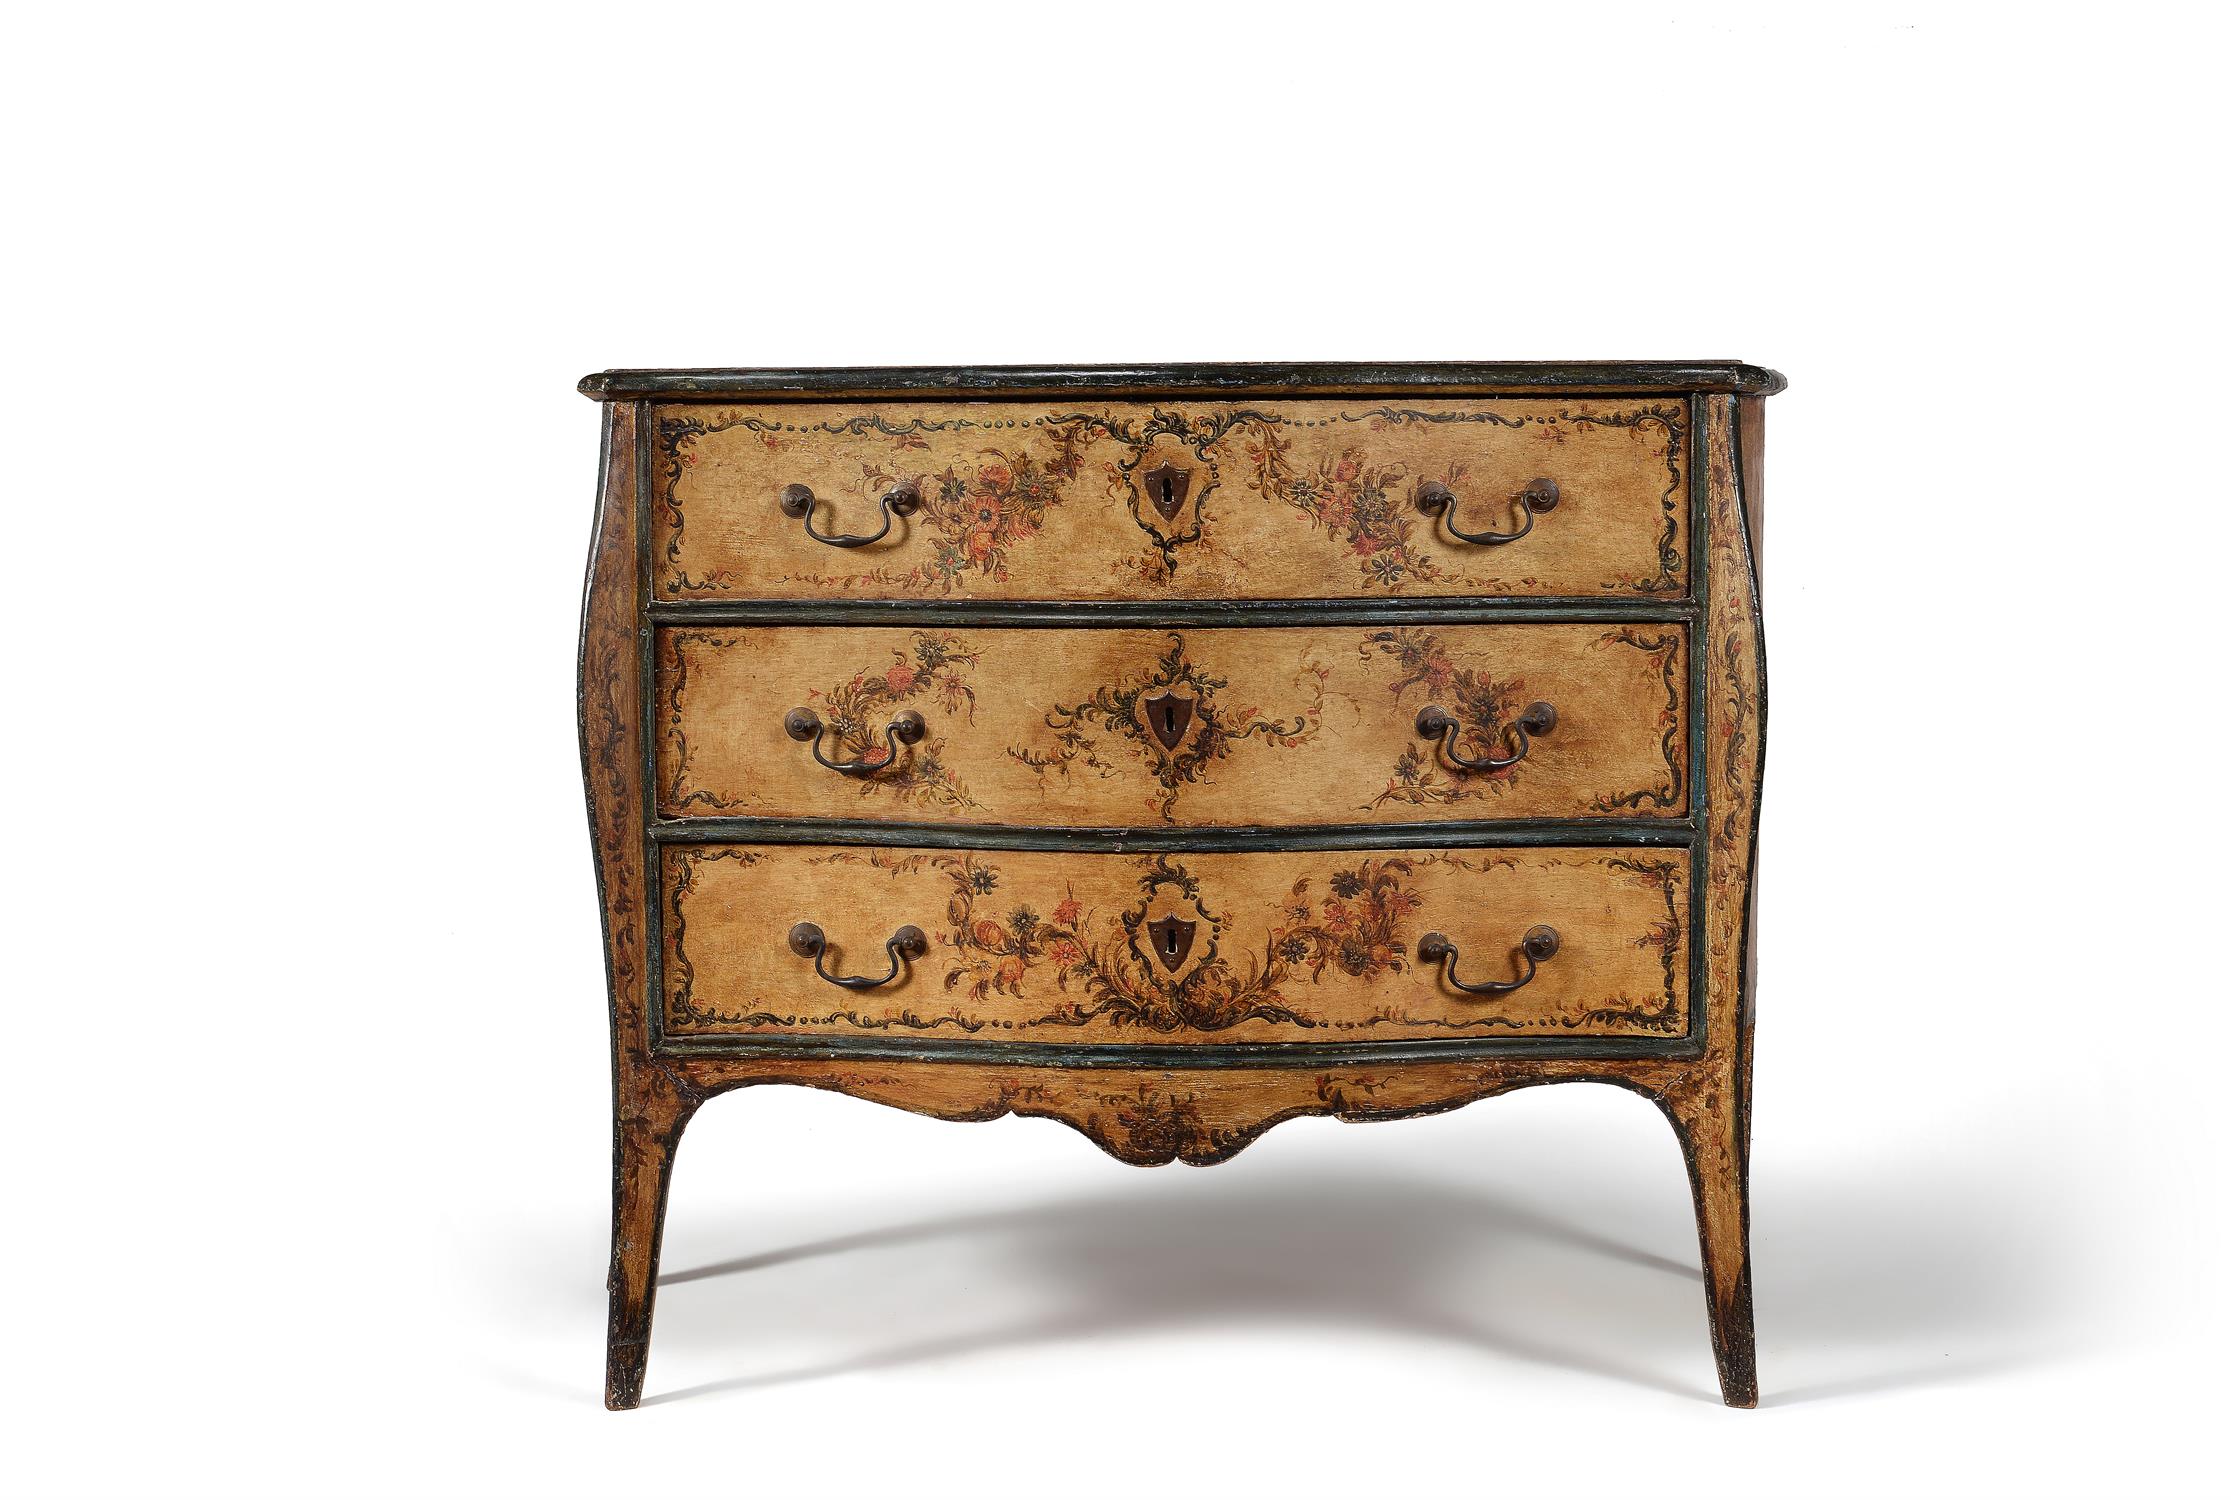 An Italian polychrome painted serpentine commode, circa 1780